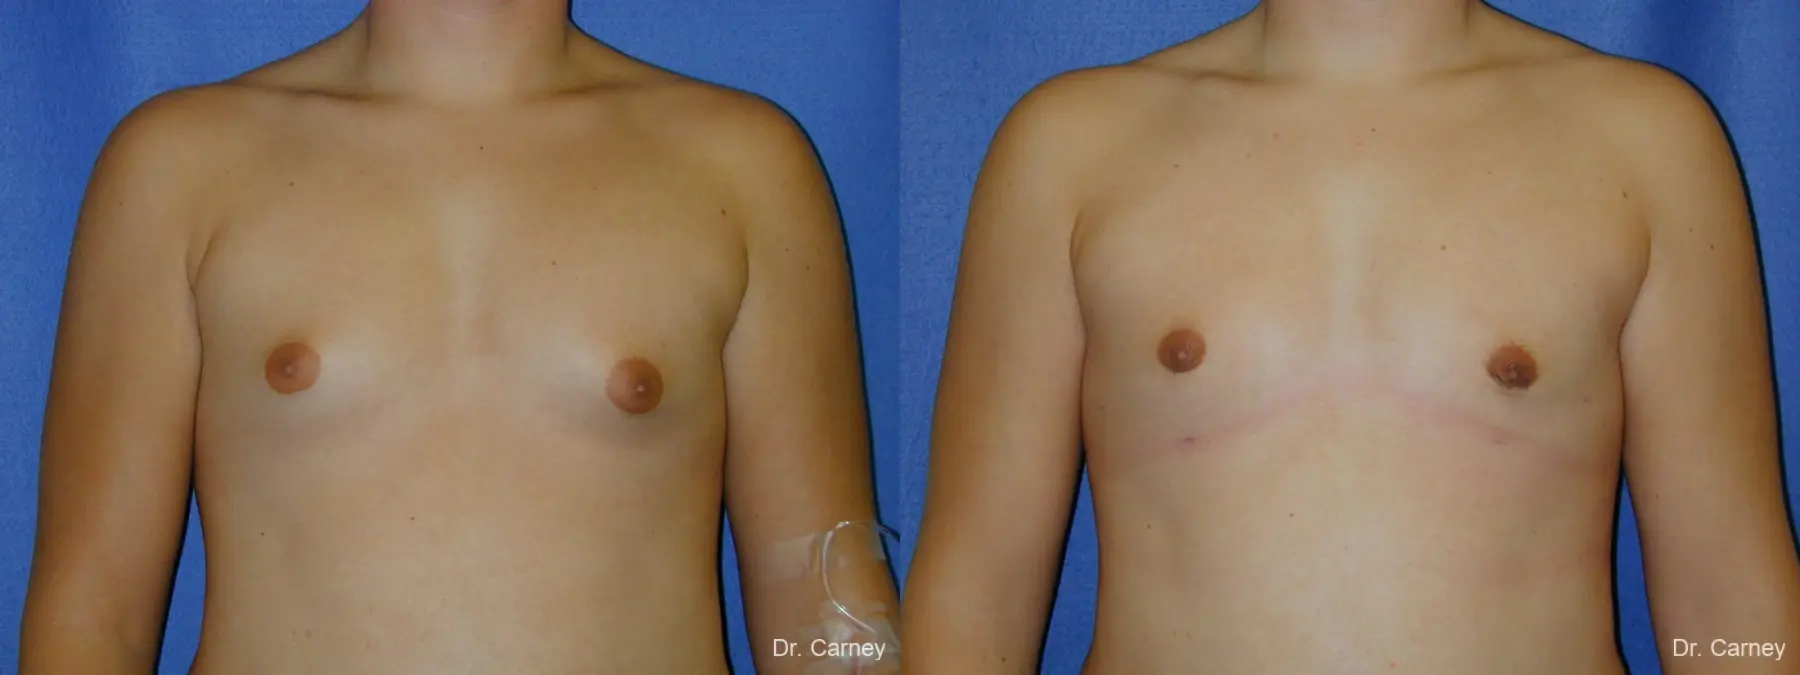 Virginia Beach Gynecomastia - Before and After 1